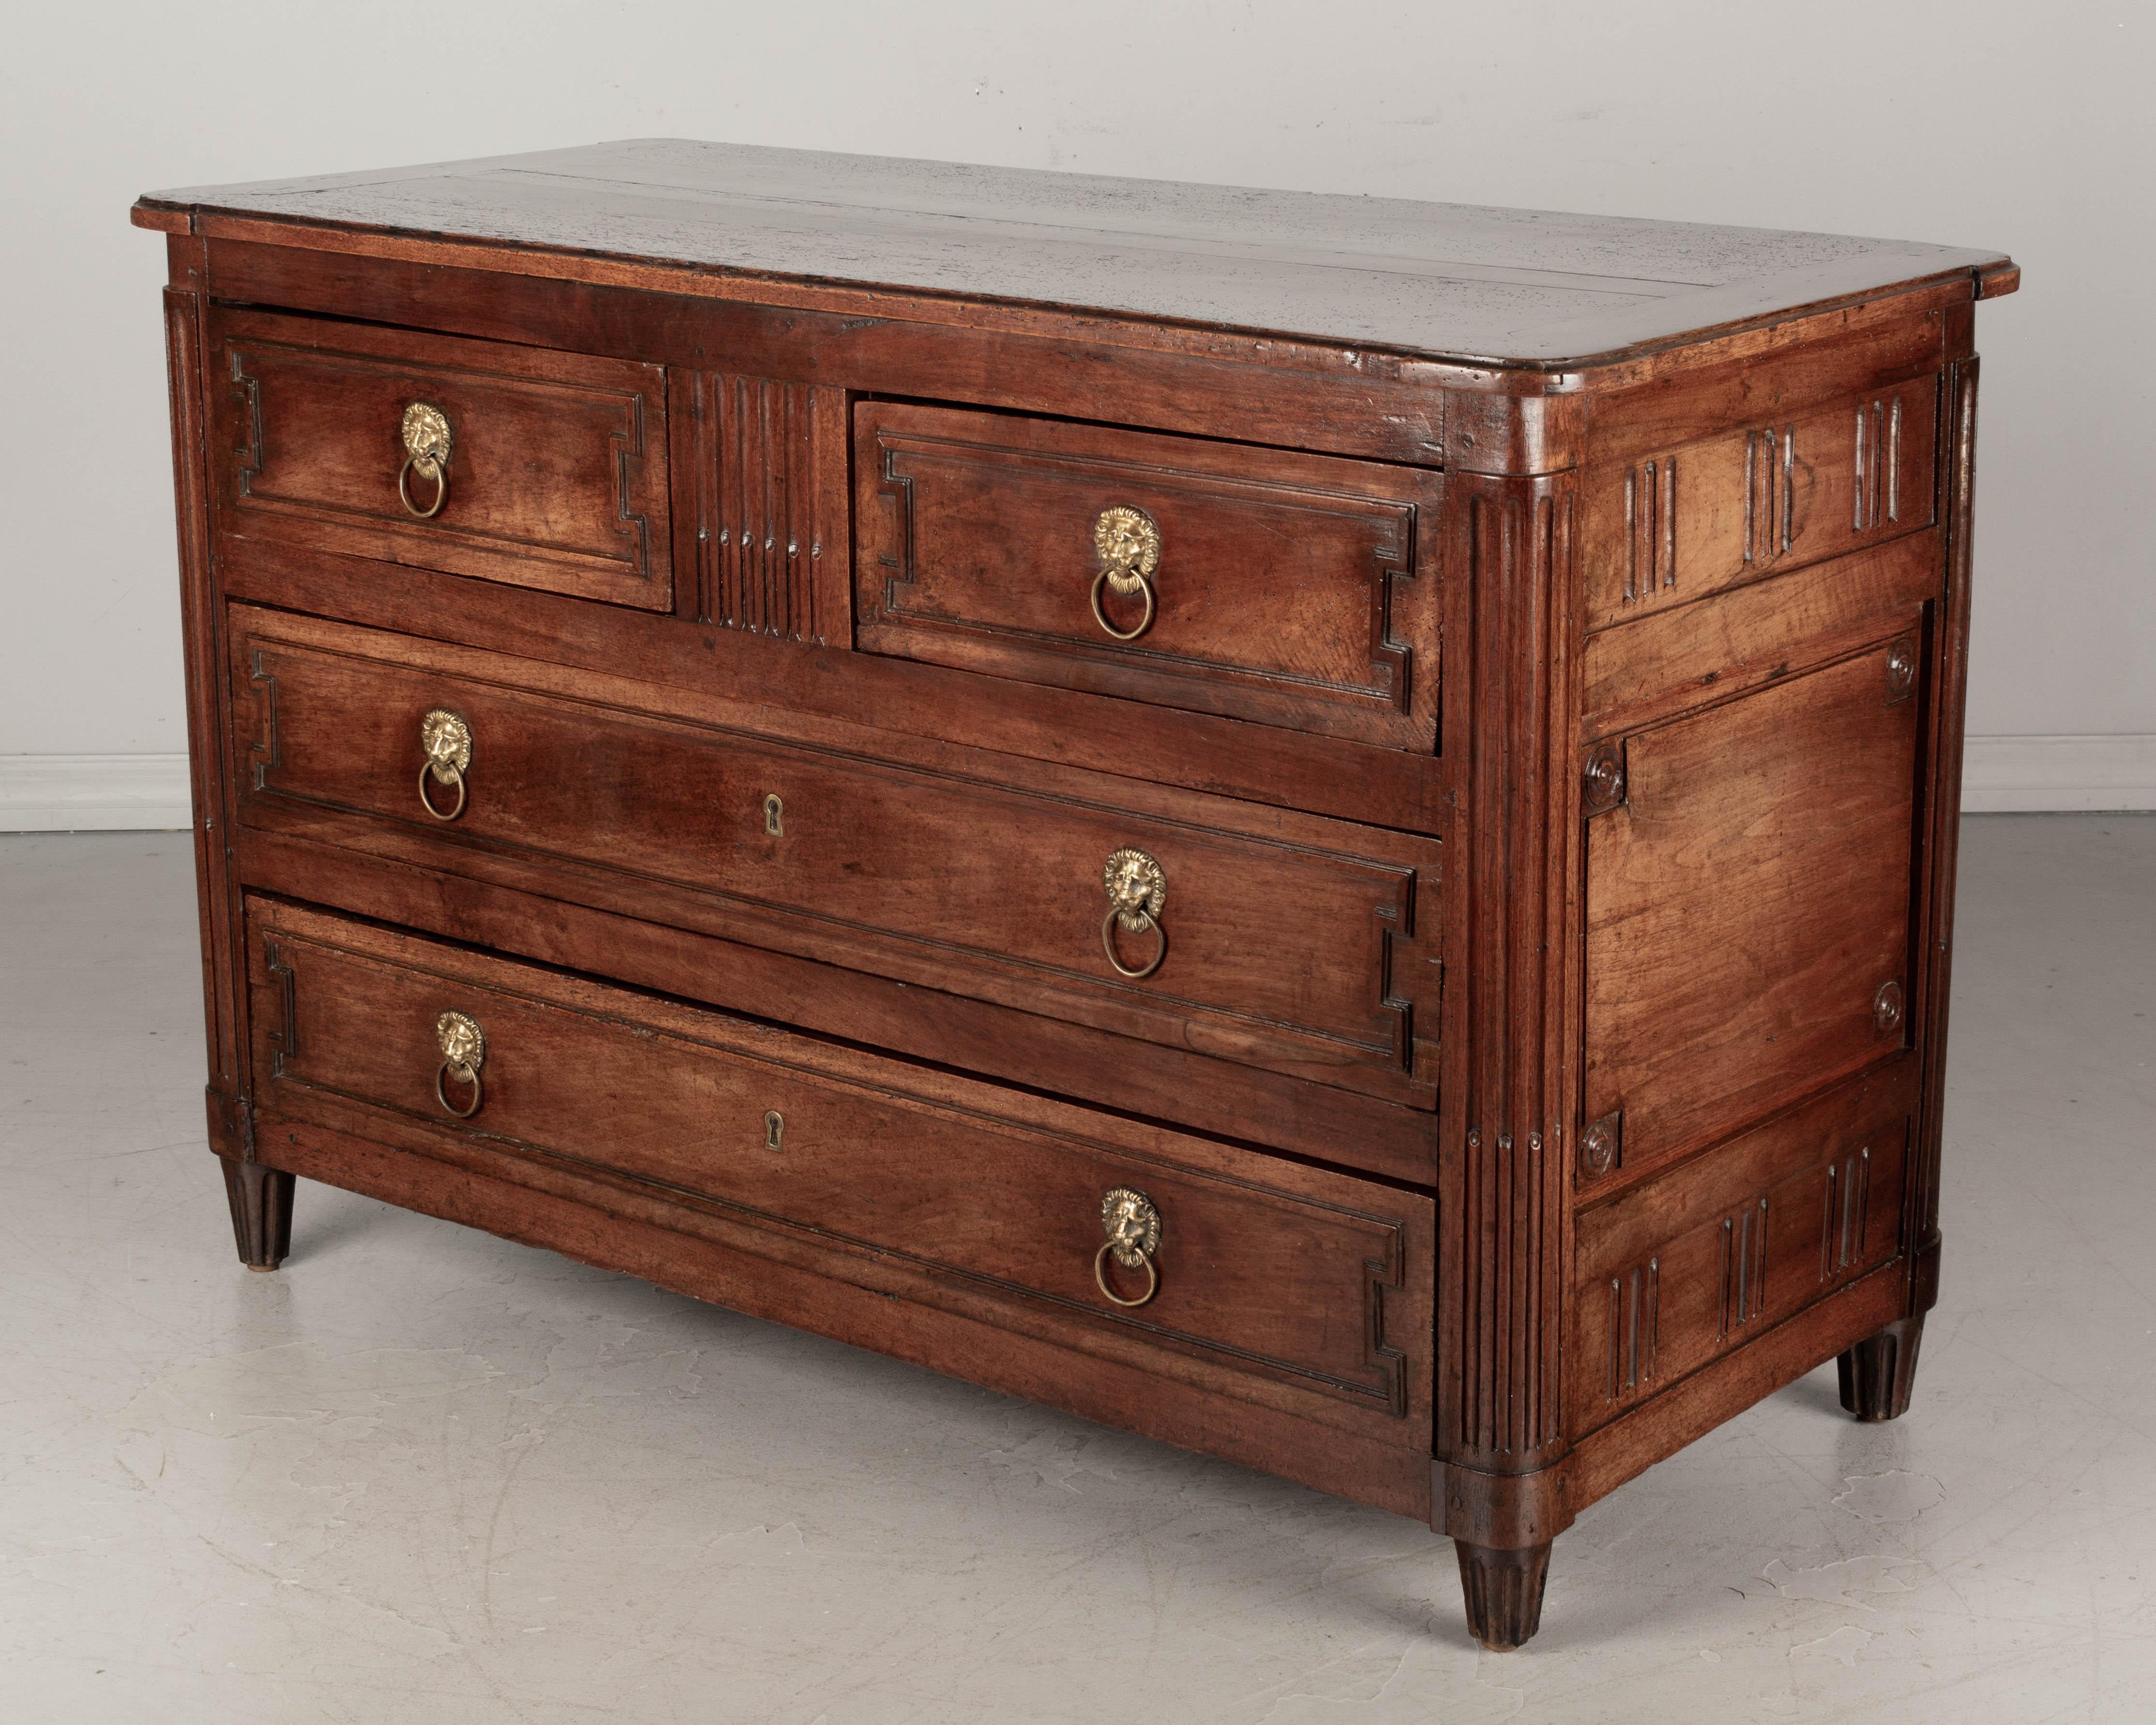 An 18th century French Louis XVI period commode, or chest of drawers, made of solid walnut. Three panels on the sides, rounded fluted corners and short tapered legs. Four dovetailed drawers with cast brass lion head ring pulls. The interior of the